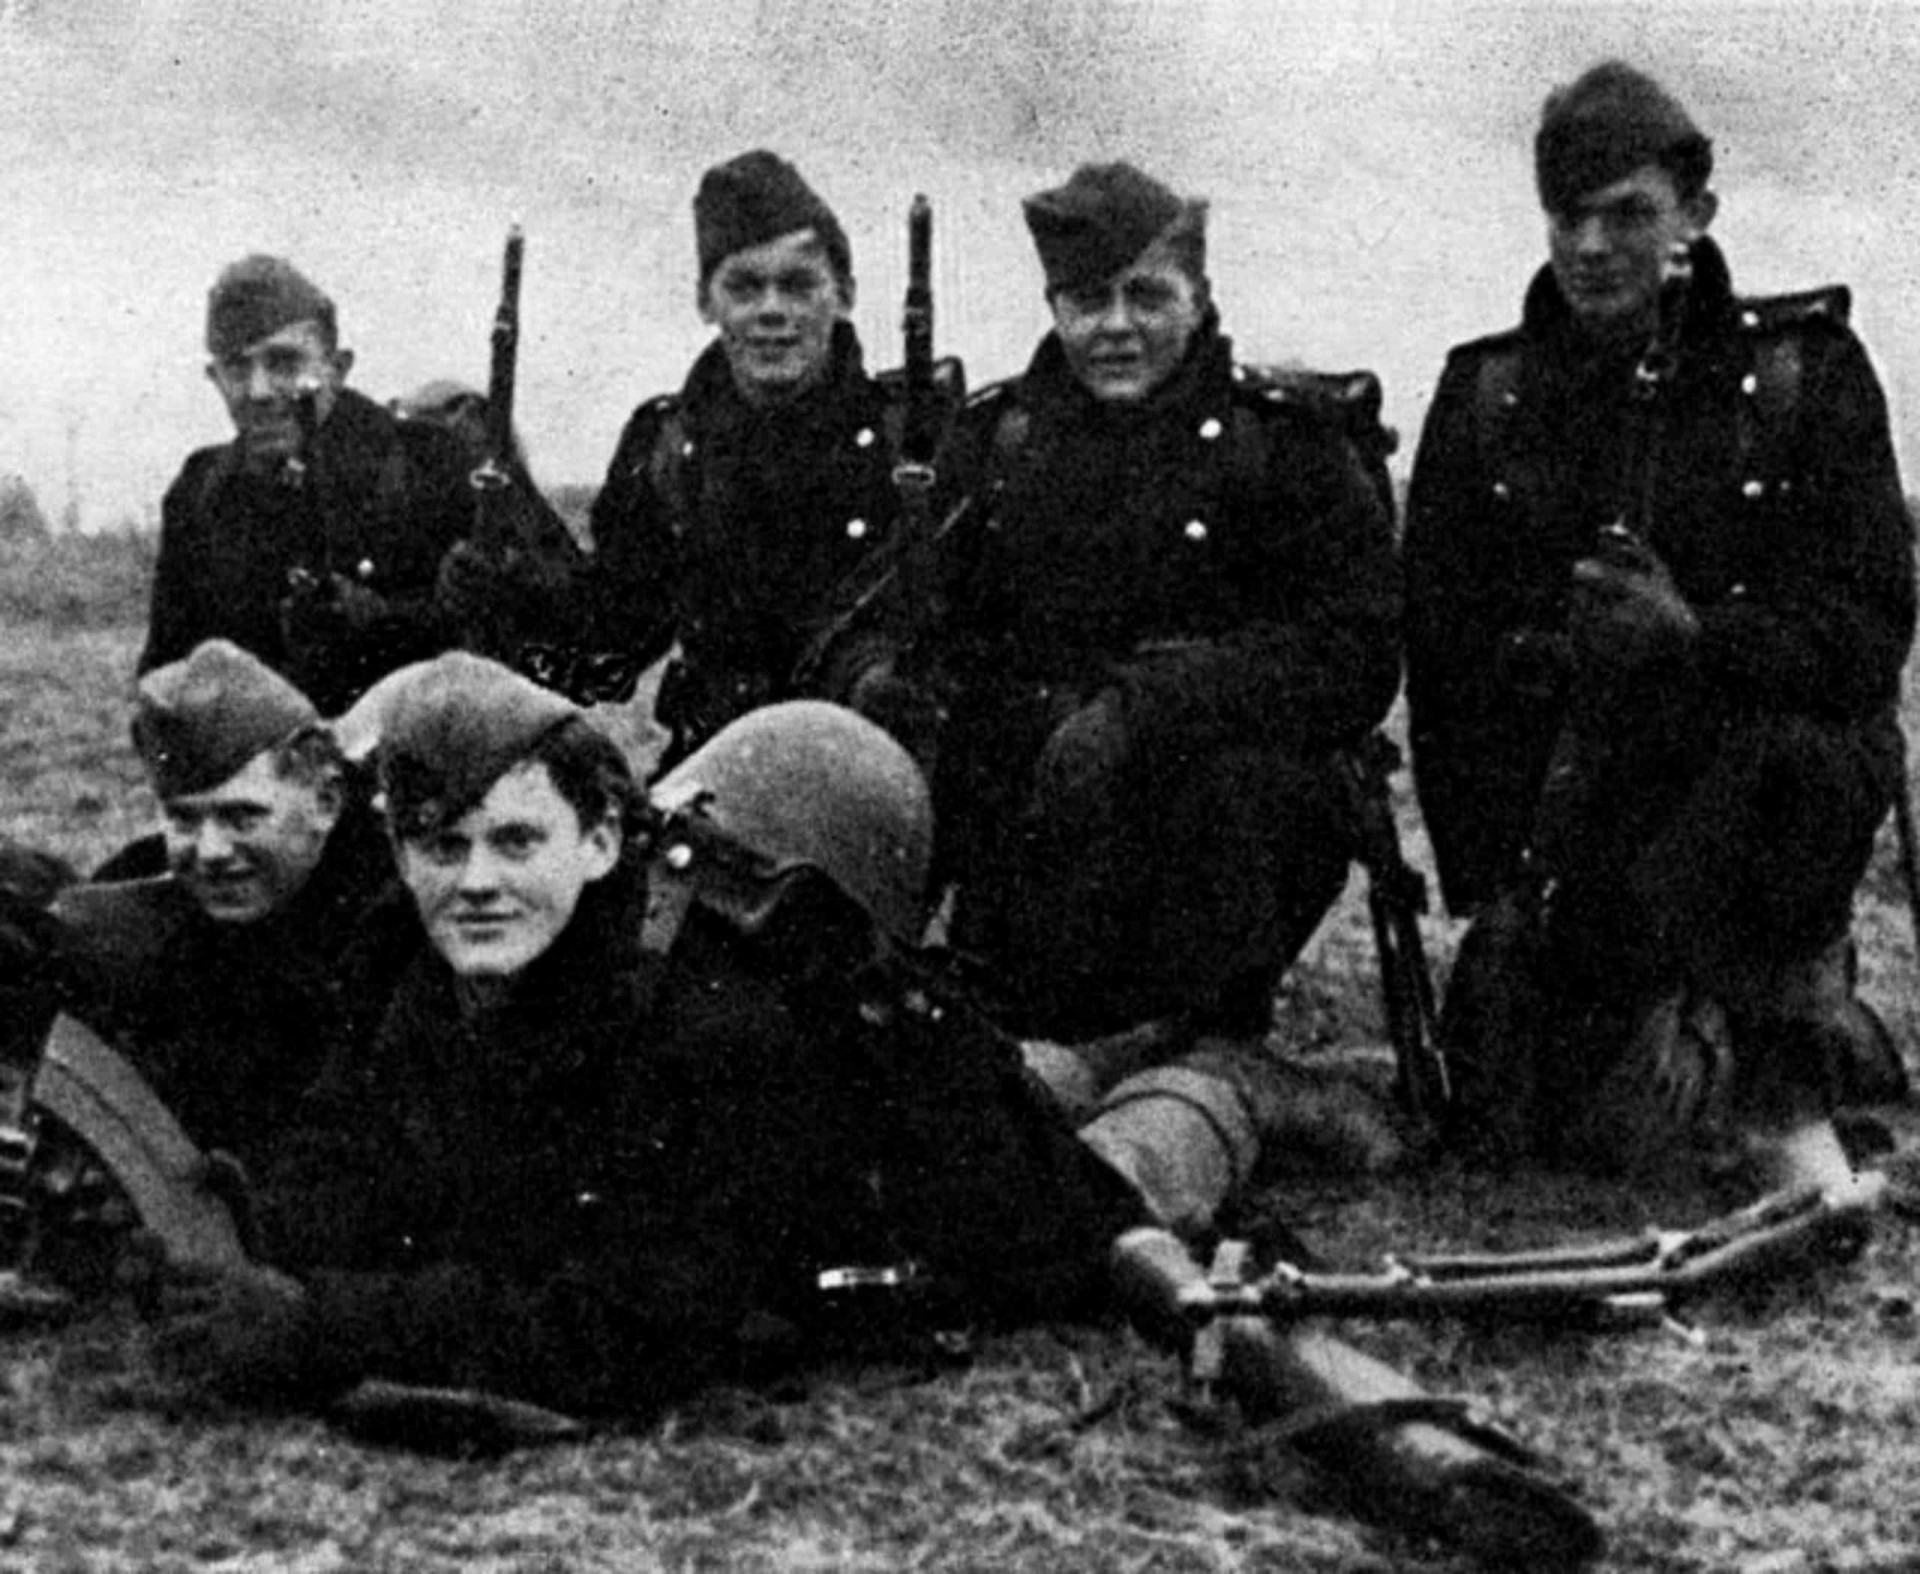 <p>Danish and German forces clashed again at Bredevad, resulting in the Danes successfully disabling four enemy armored cars. However, casualties forced them to eventually surrender. Pictured is a group of Danish soldiers on the day of the German invasion.</p><p>You may also like:<a href="https://www.starsinsider.com/n/199449?utm_source=msn.com&utm_medium=display&utm_campaign=referral_description&utm_content=656672en-my"> Find out the richest and poorest suburbs of Australia</a></p>